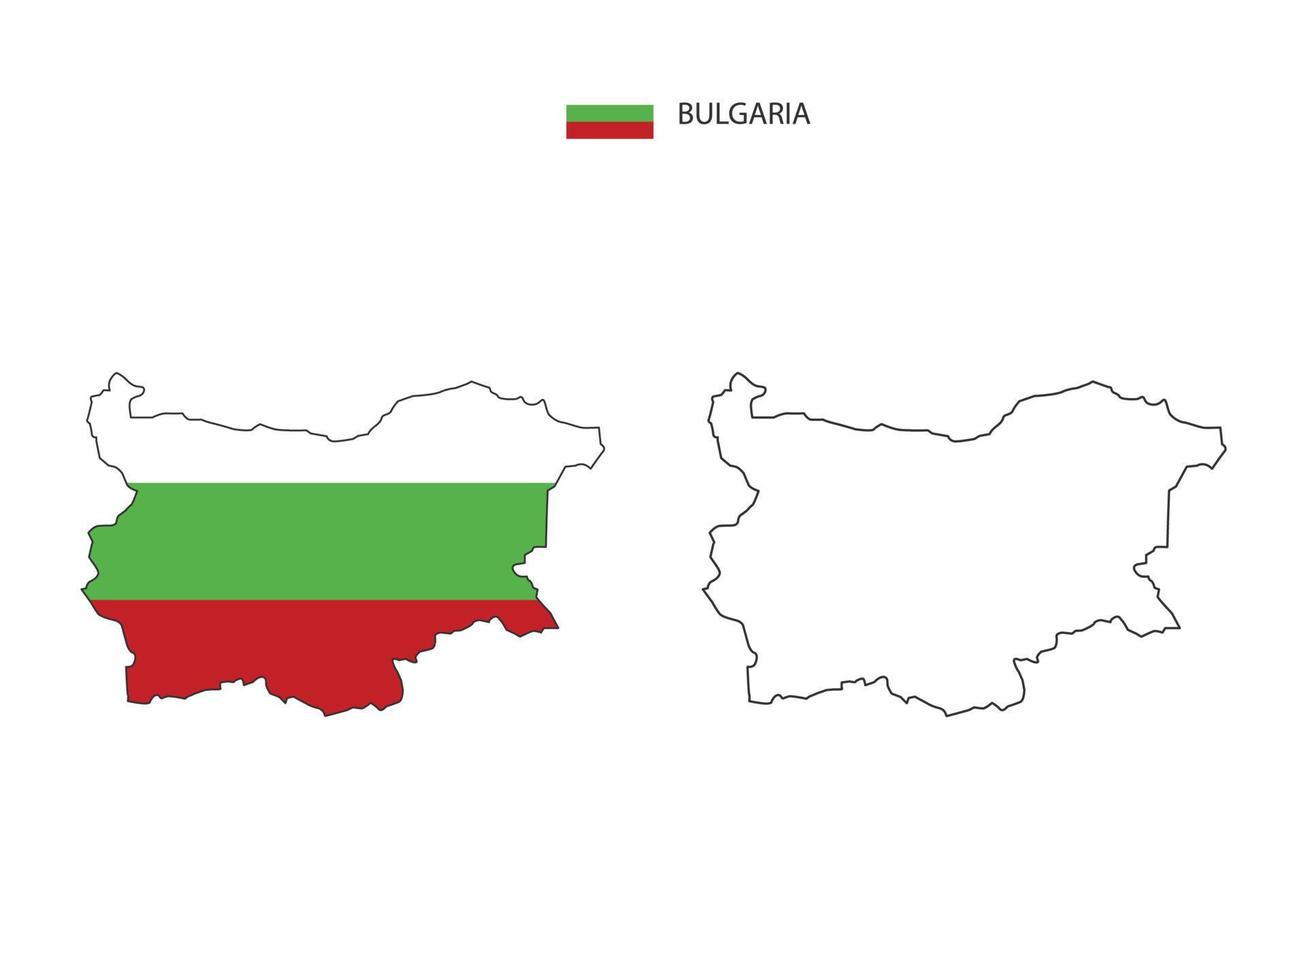 Bulgaria map city vector divided by outline simplicity style. Have 2 versions, black thin line version and color of country flag version. Both map were on the white background.